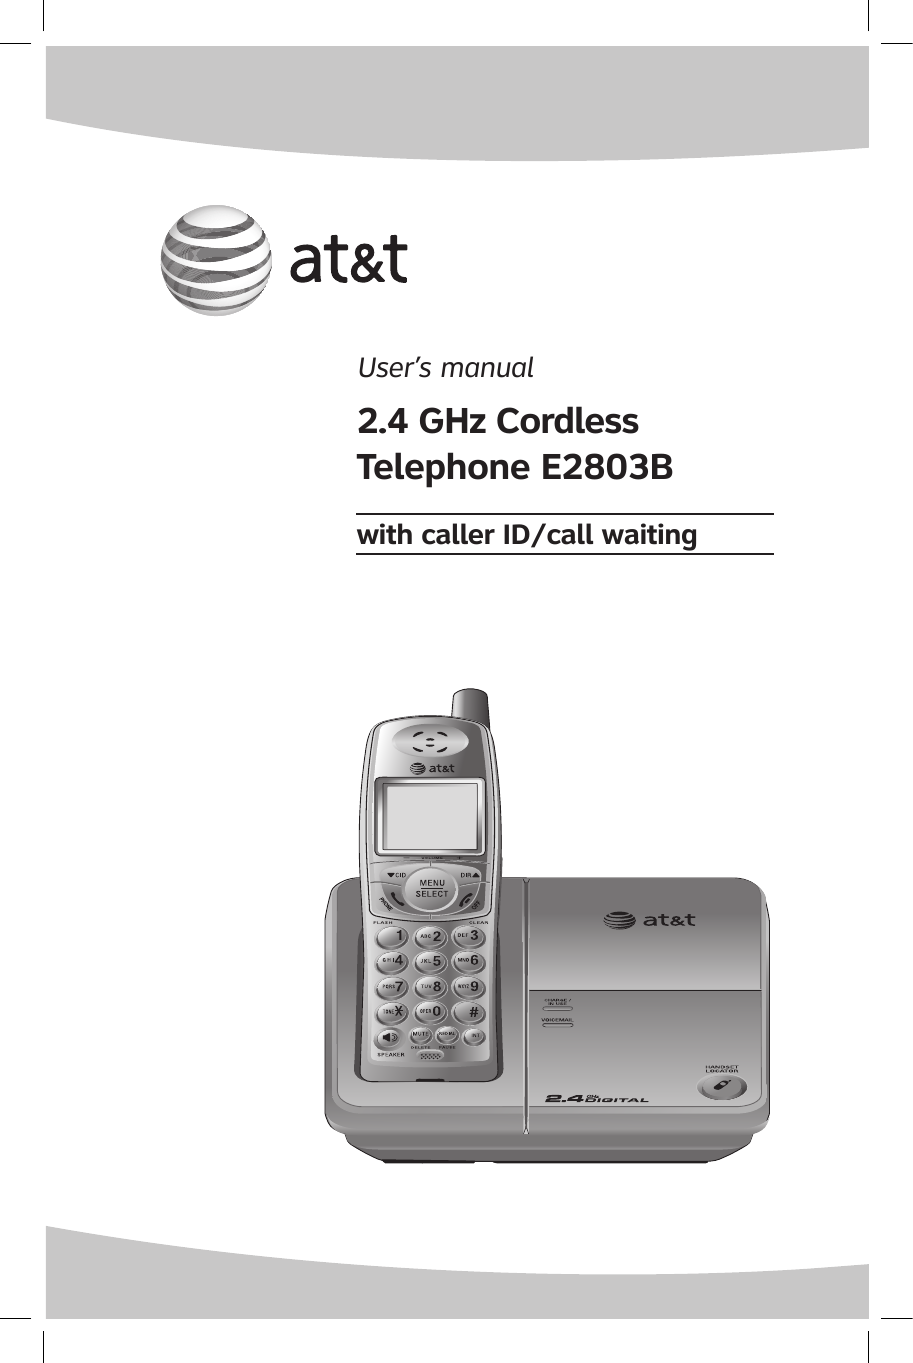 User’s manual 2.4 GHz Cordless Telephone E2803Bwith caller ID/call waiting